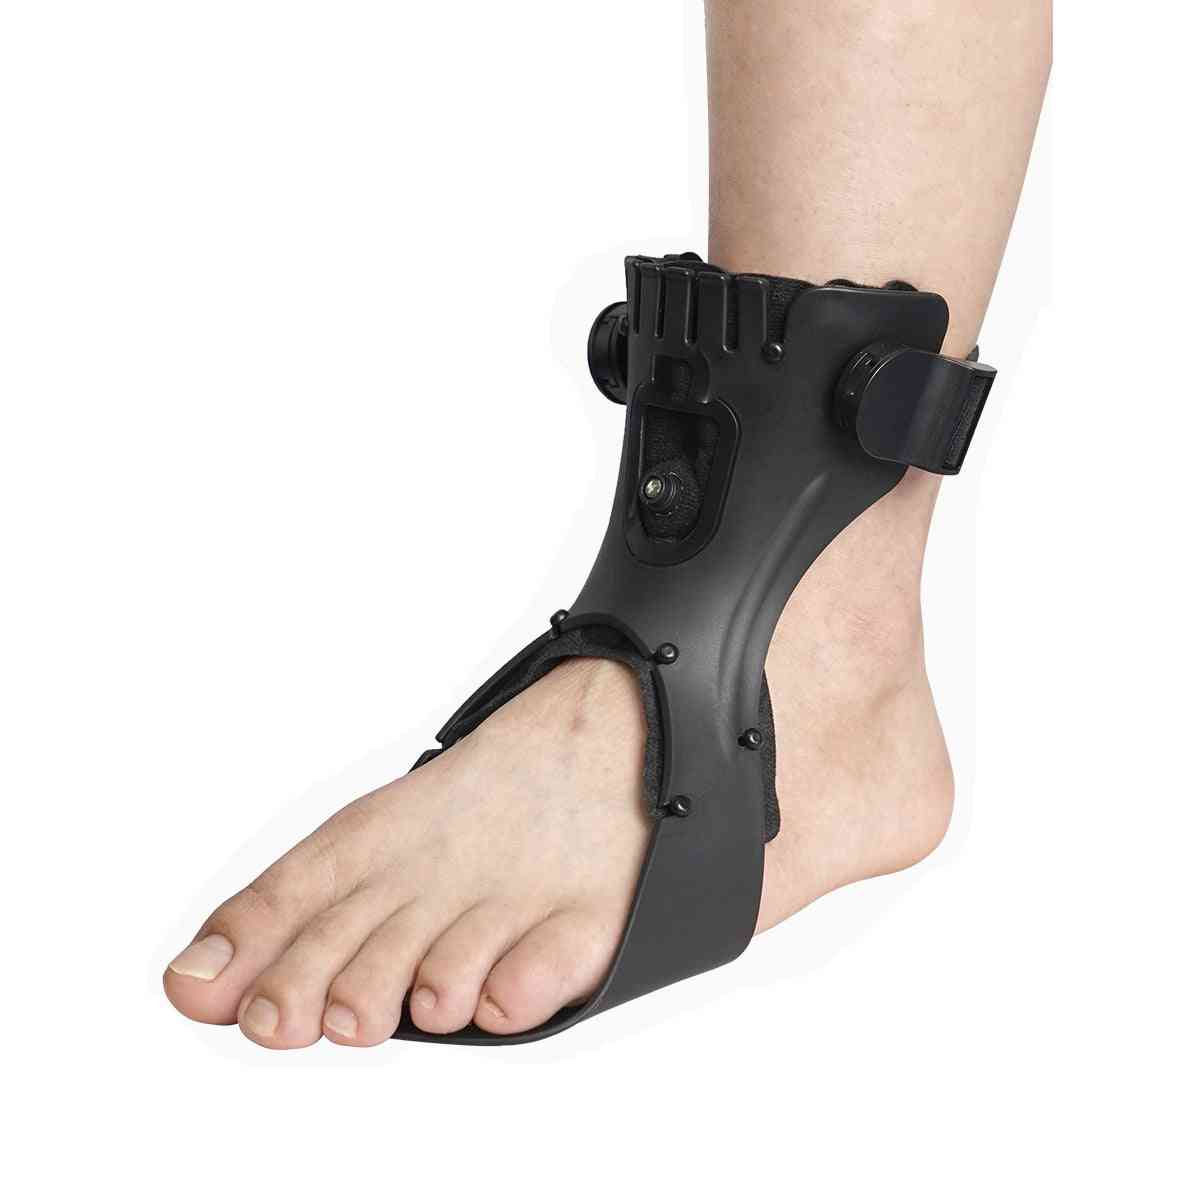 SYREBO Foot Drop Brace Medical Foot Up Ankle Foot Orthosis Support wit